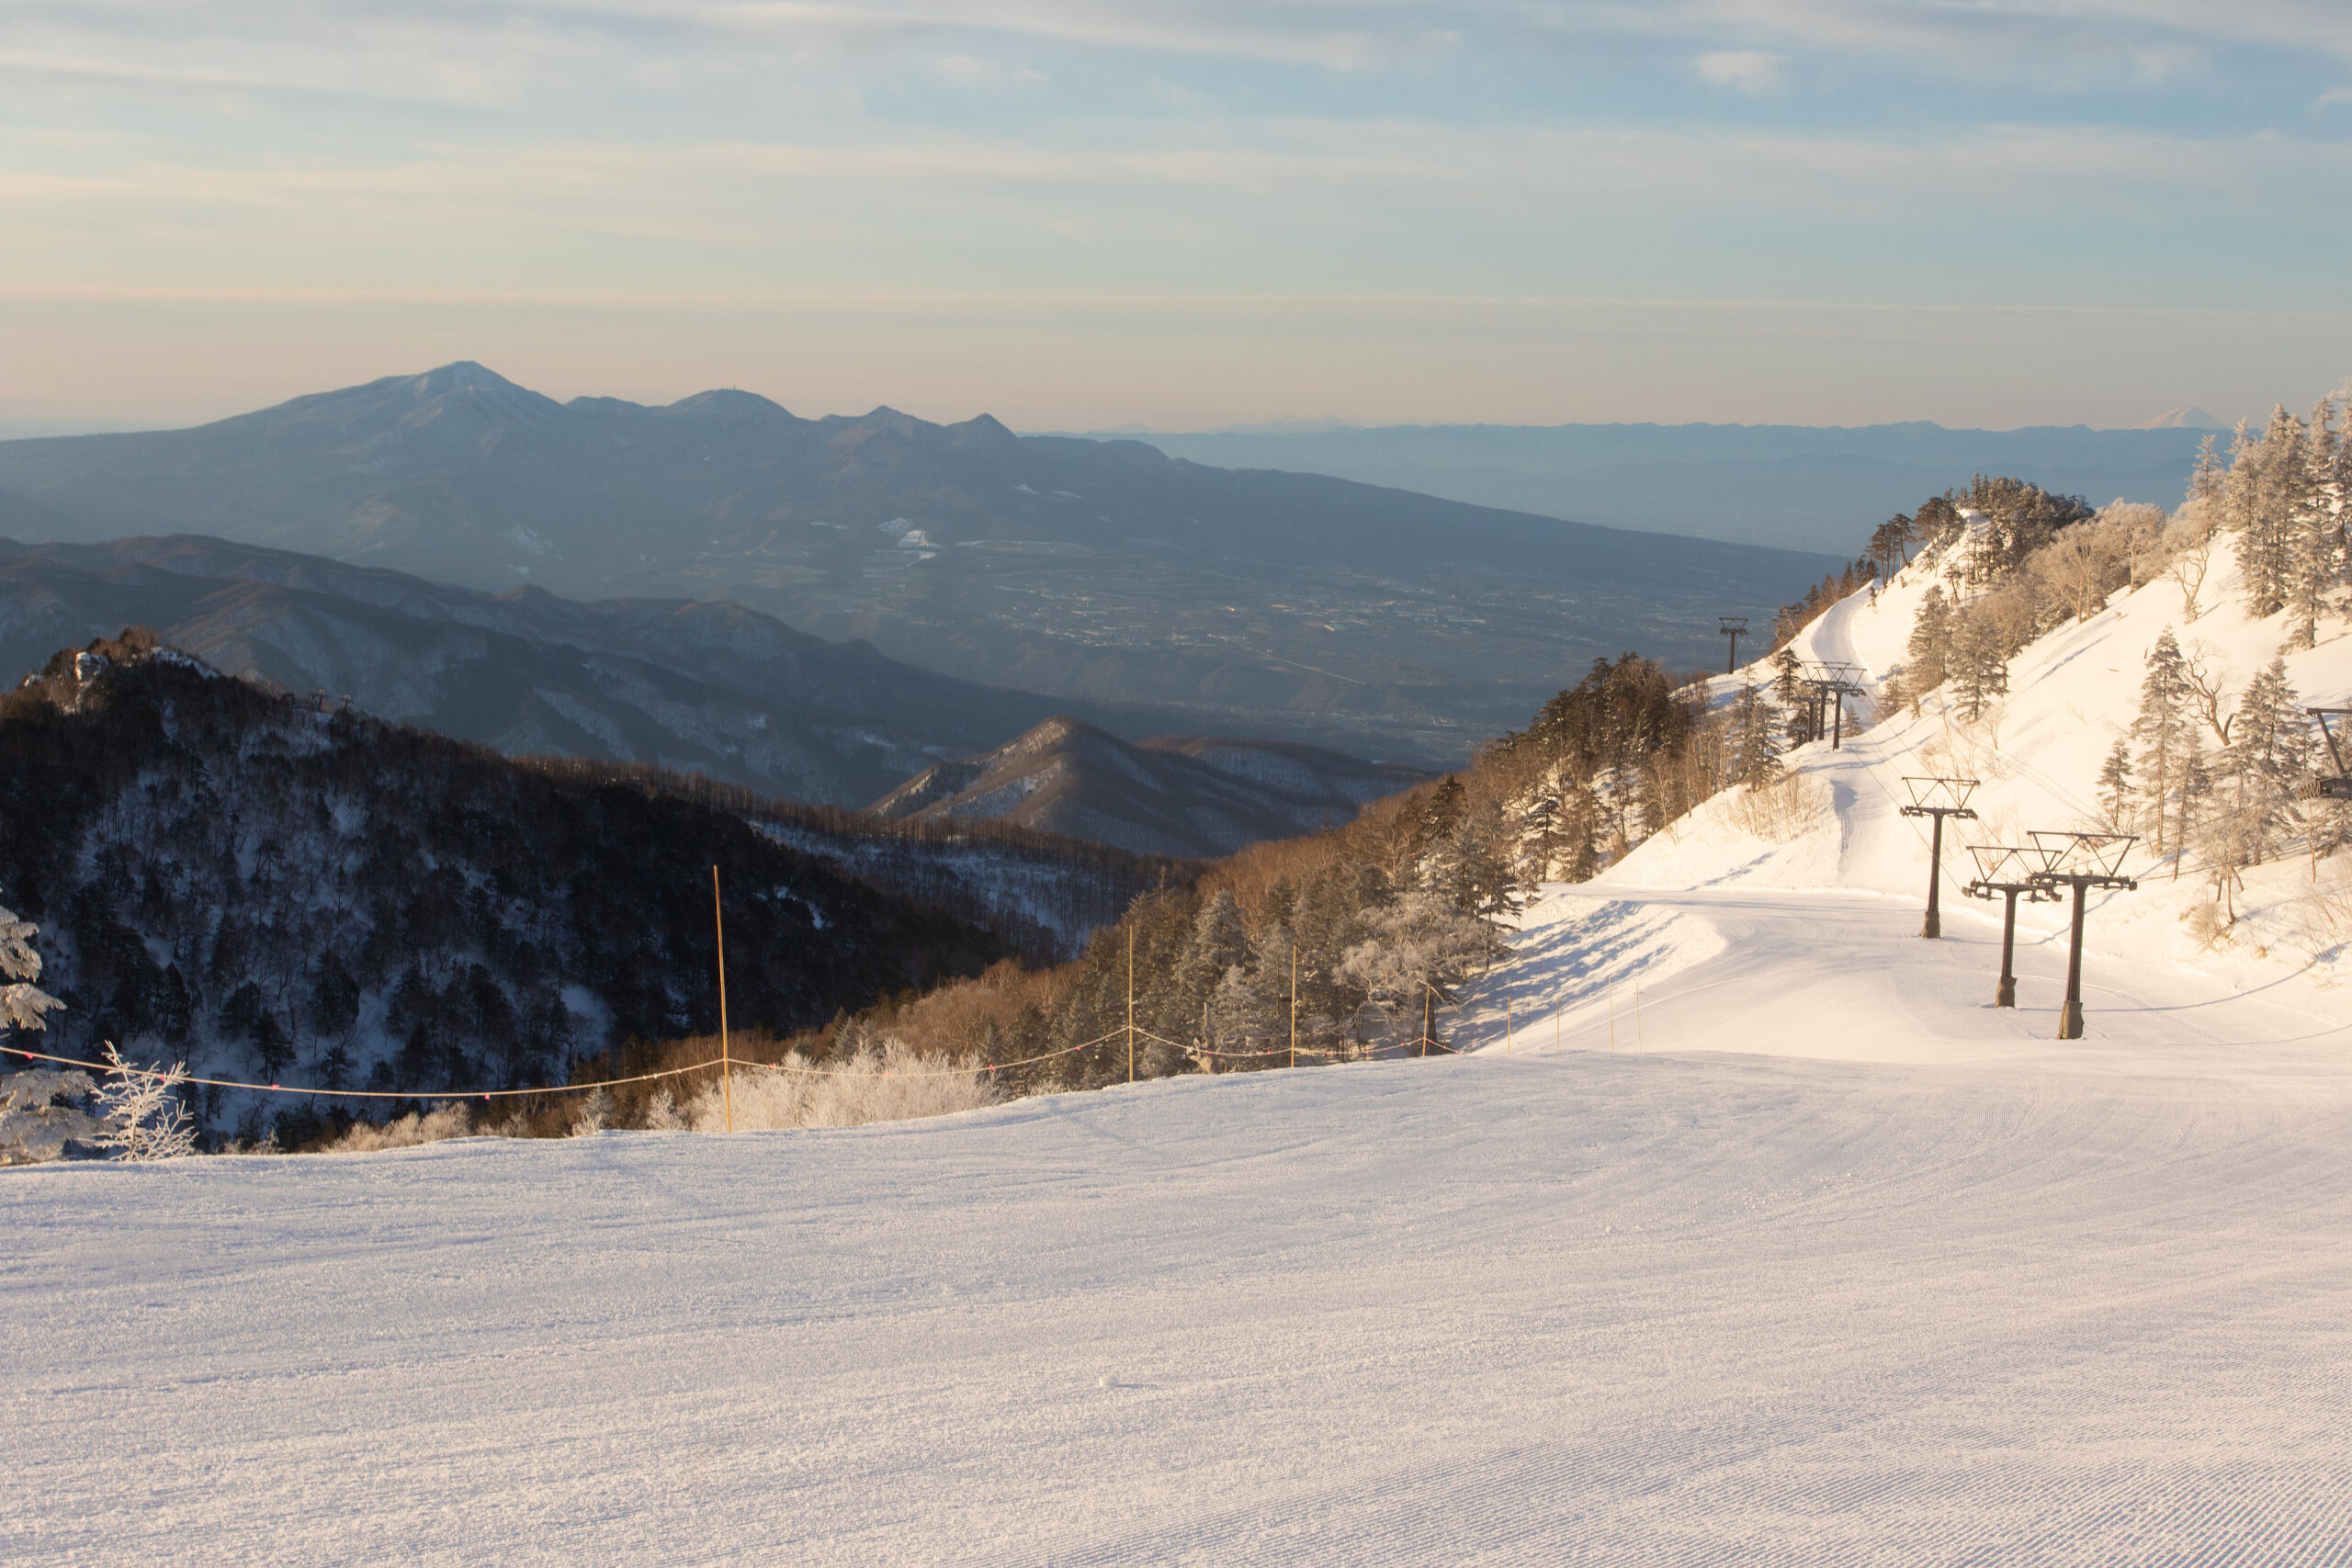 Kawaba Ski Resort Lift 1-day Package (1,000-yen meal + 500-yen gift ticket + POWDER LOUNGE usage tickets included)